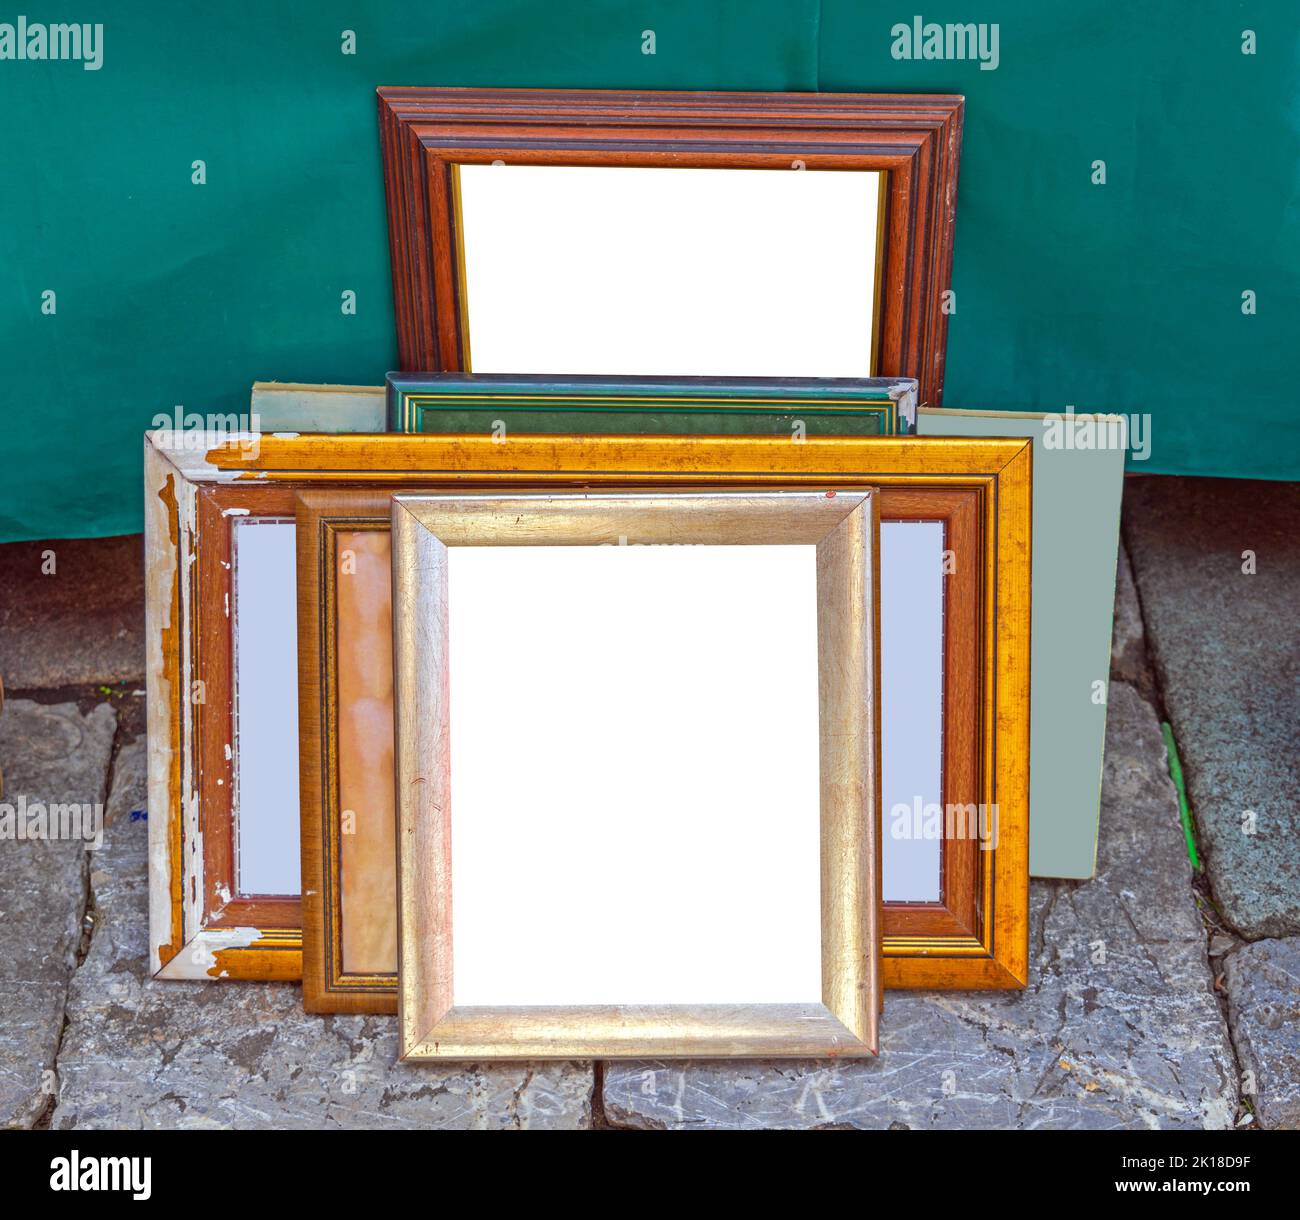 Collection of Used Empty Picture Frames Paintings and Portrait Copy Space Stock Photo